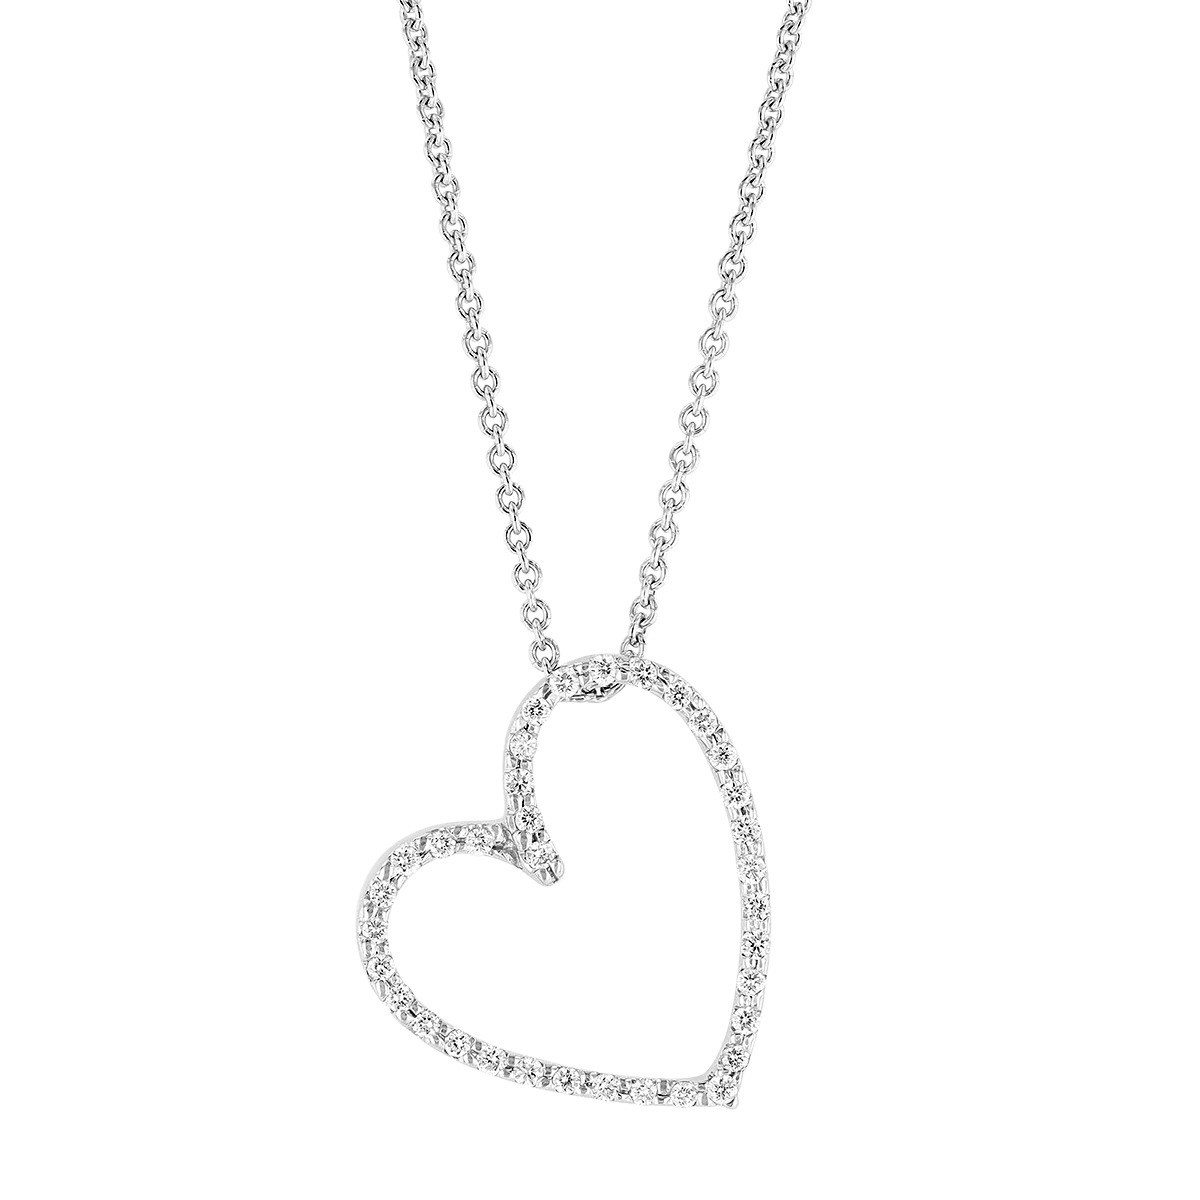 14K White Gold Diamond Heart Charm Holder Necklace Yellow Gold